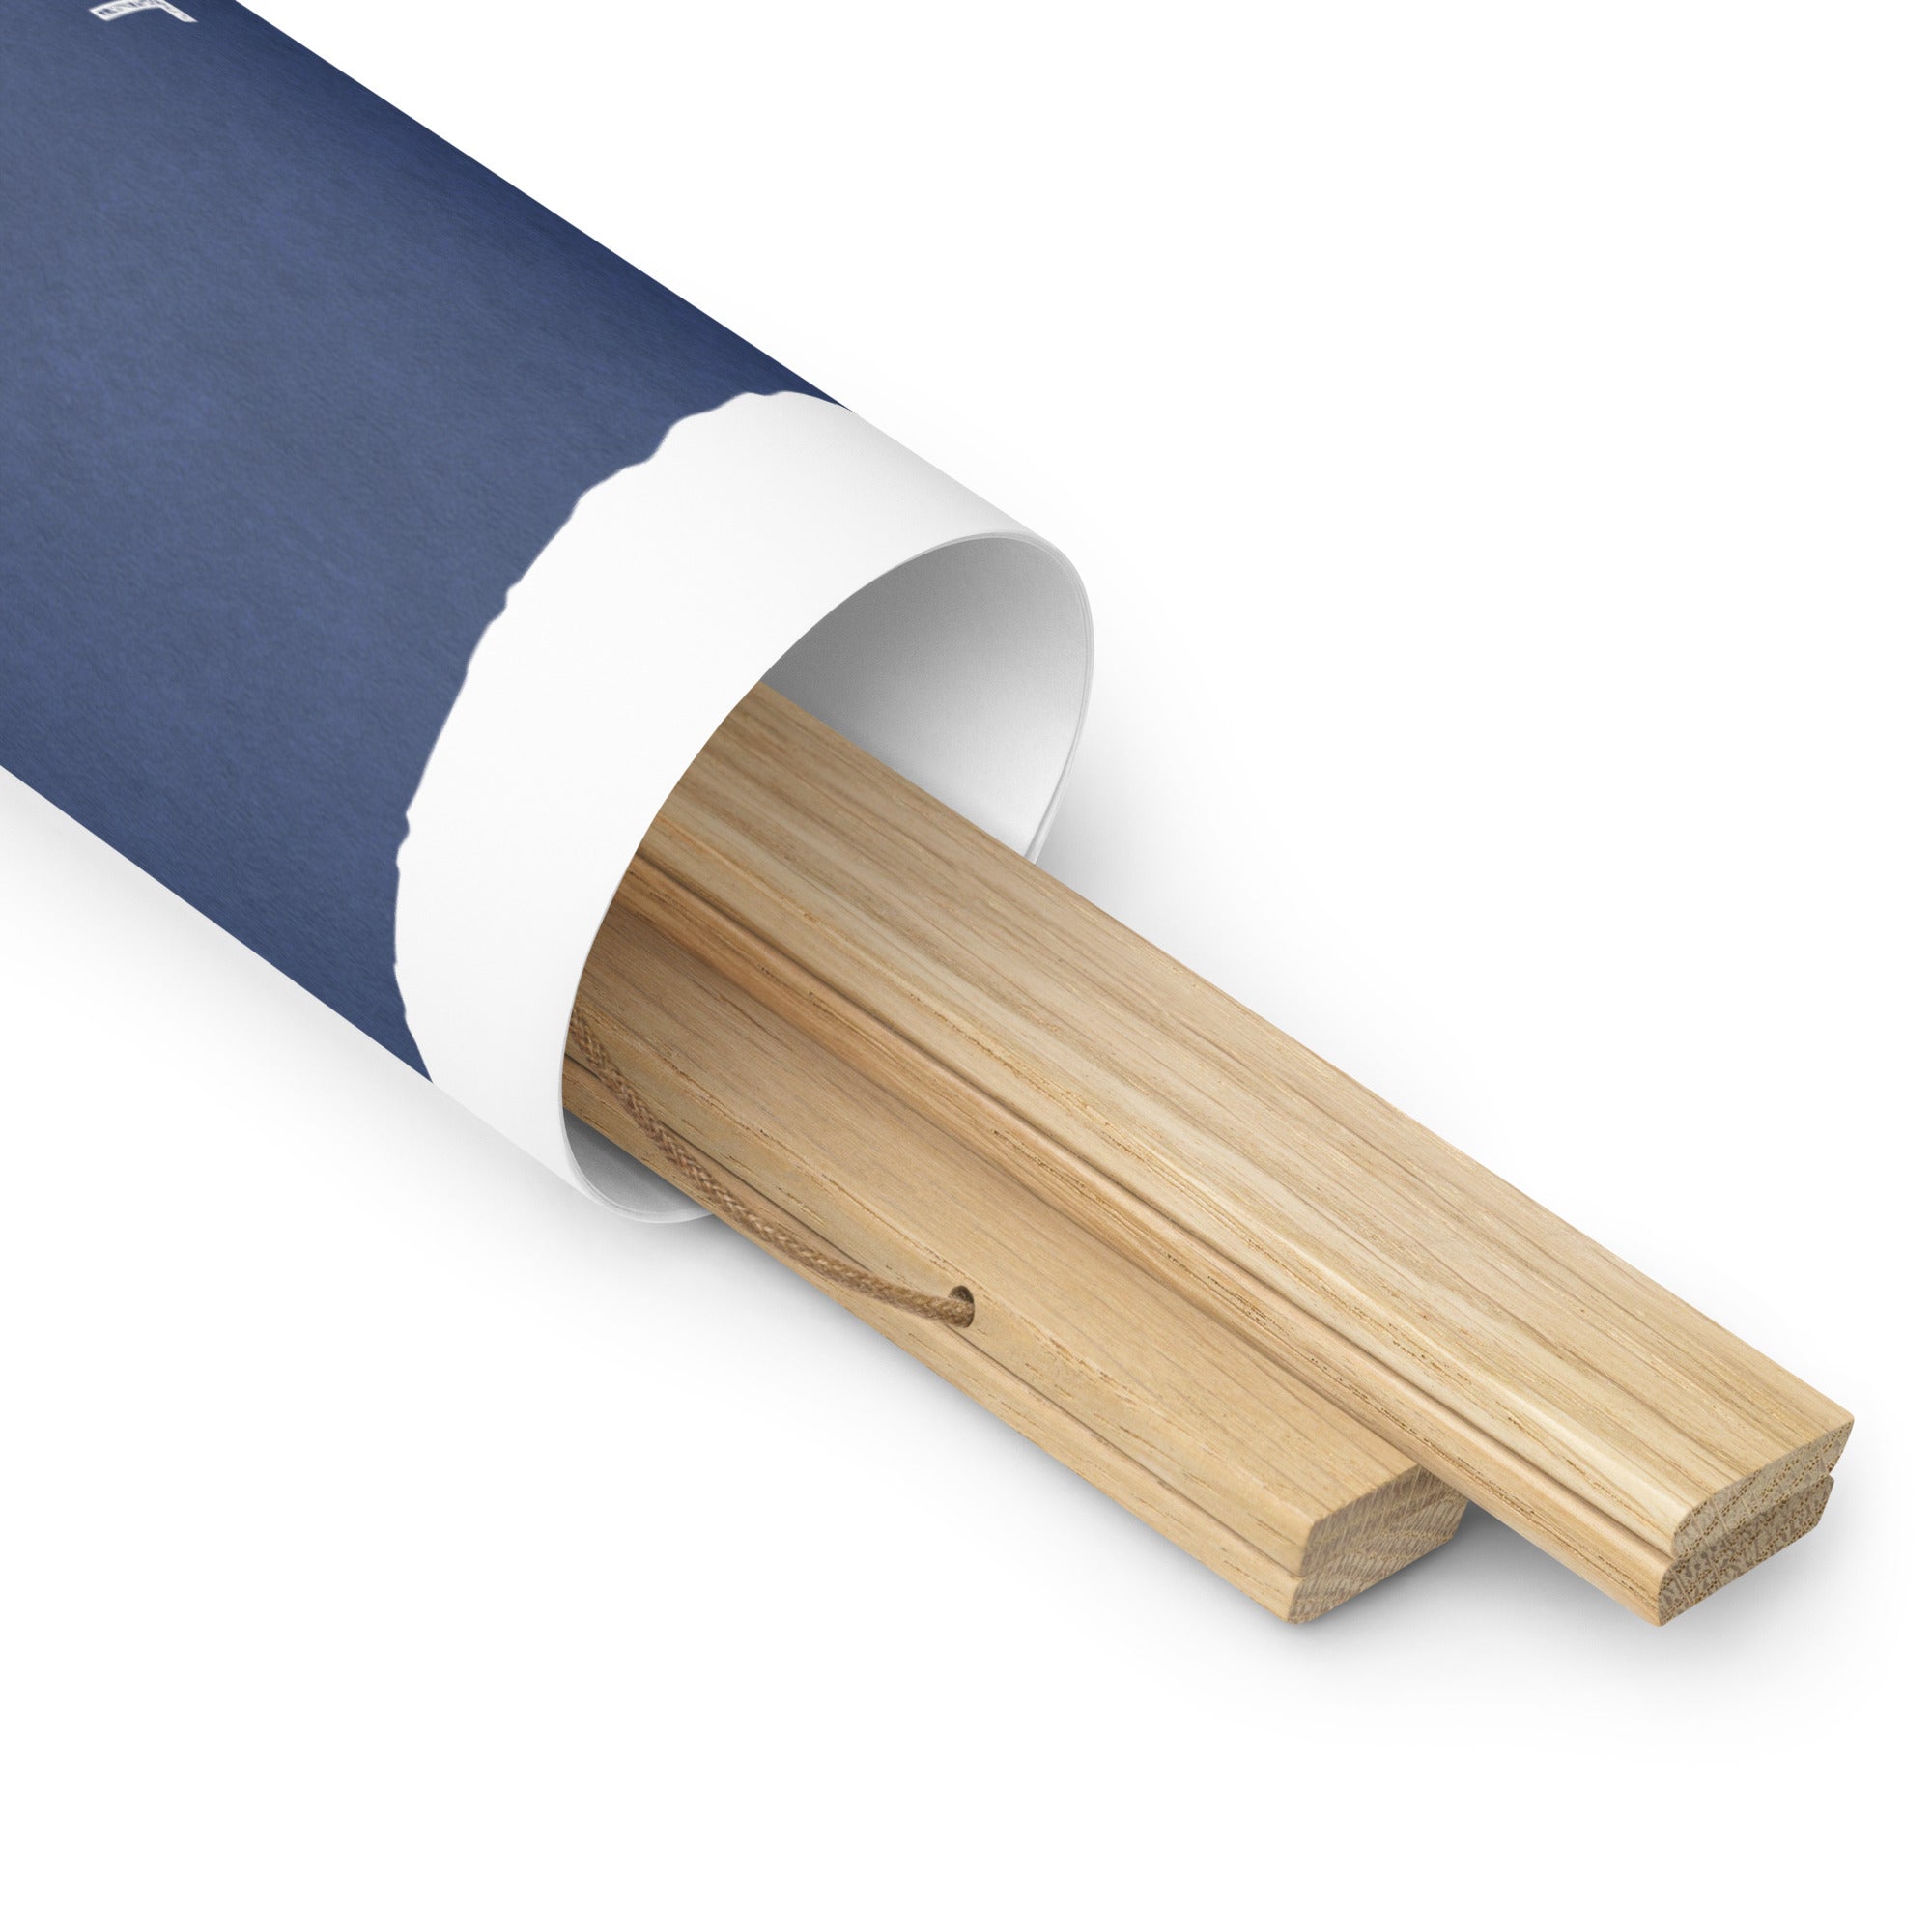 A roll of wood with a blue and white flag on it, now featuring a Behold Mother Nature's Tiniest Kept Secret Poster by Shop Wyman's.